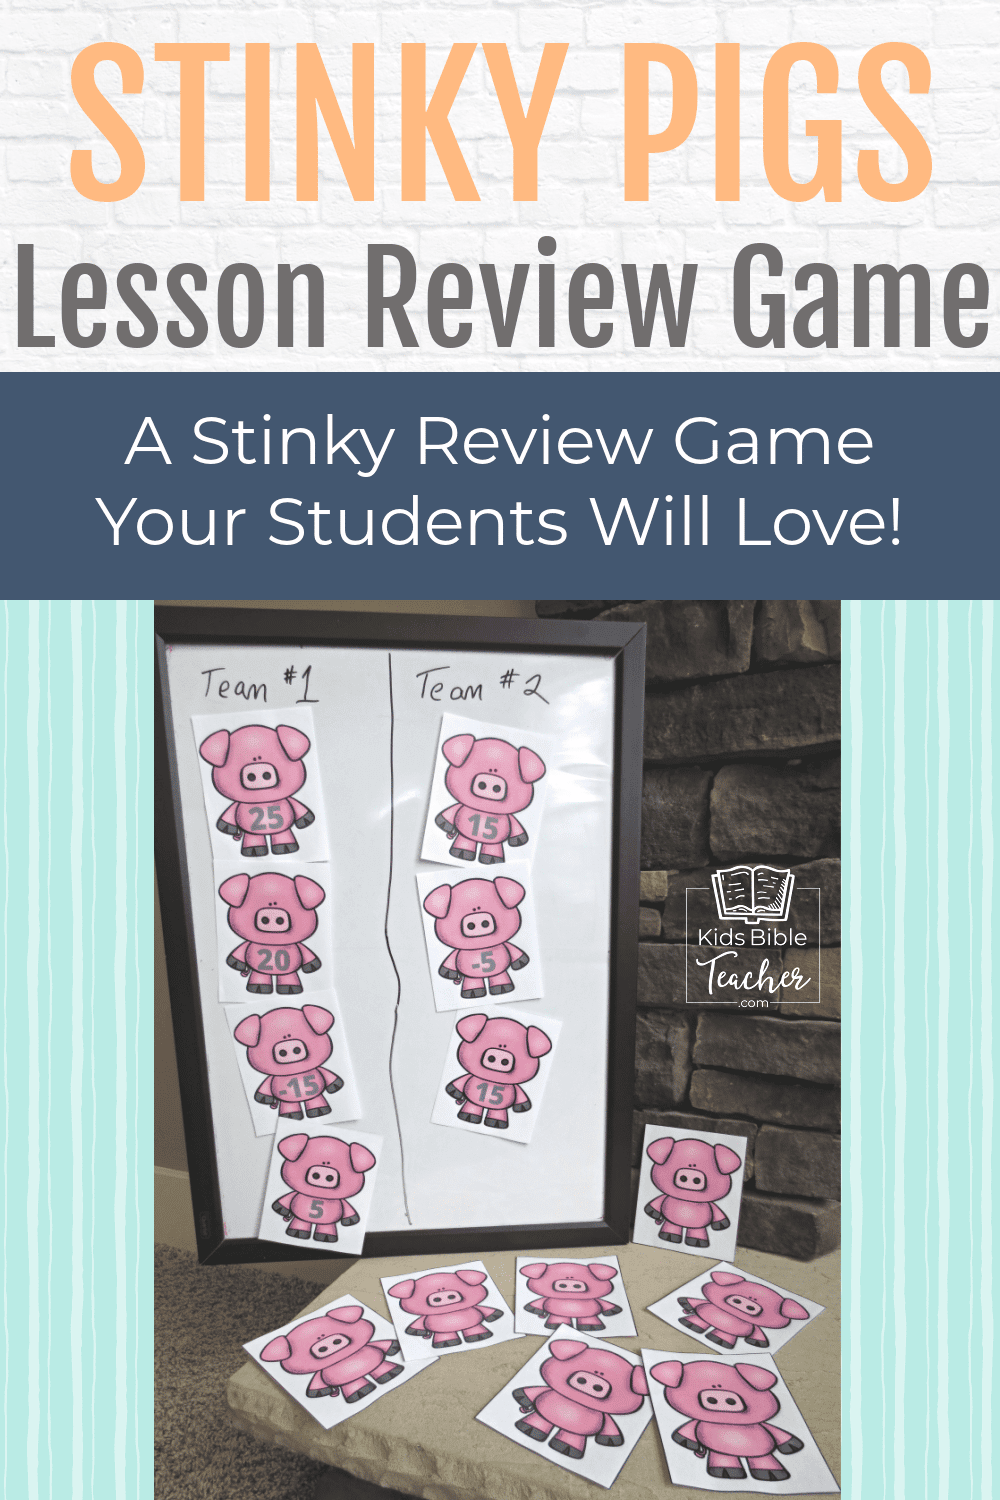 The Stinky Pigs Lesson Review Game is a perfect way to review any lesson. The tricky "Stinky Pigs" will have your kids begging to play again and again.